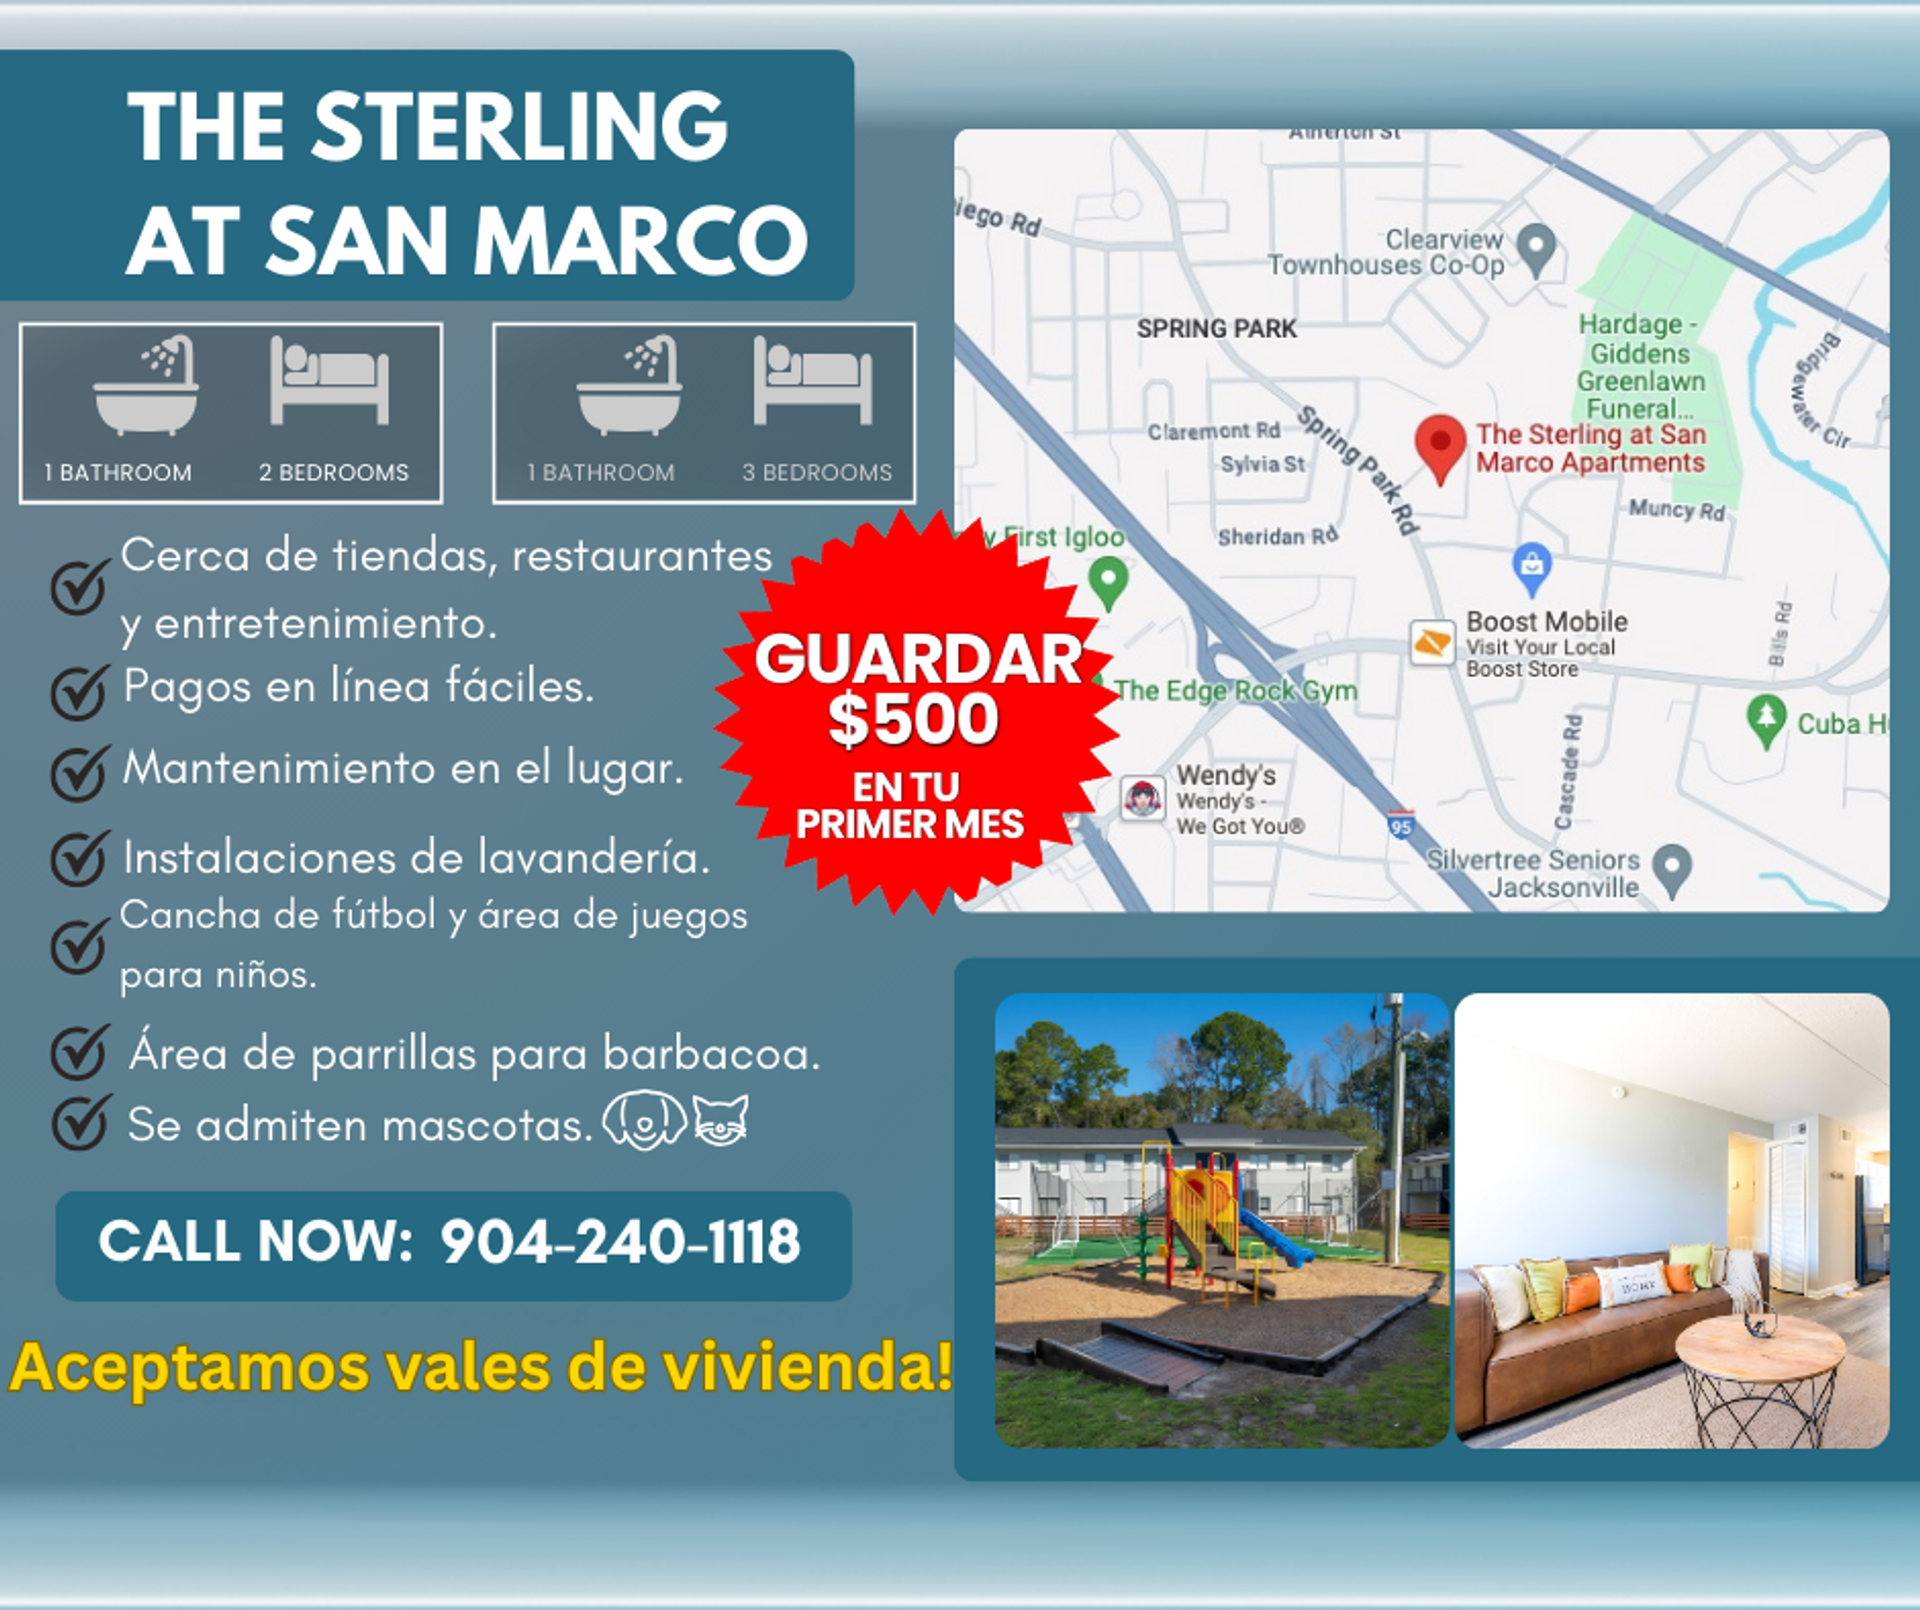 The Sterling at San Marco